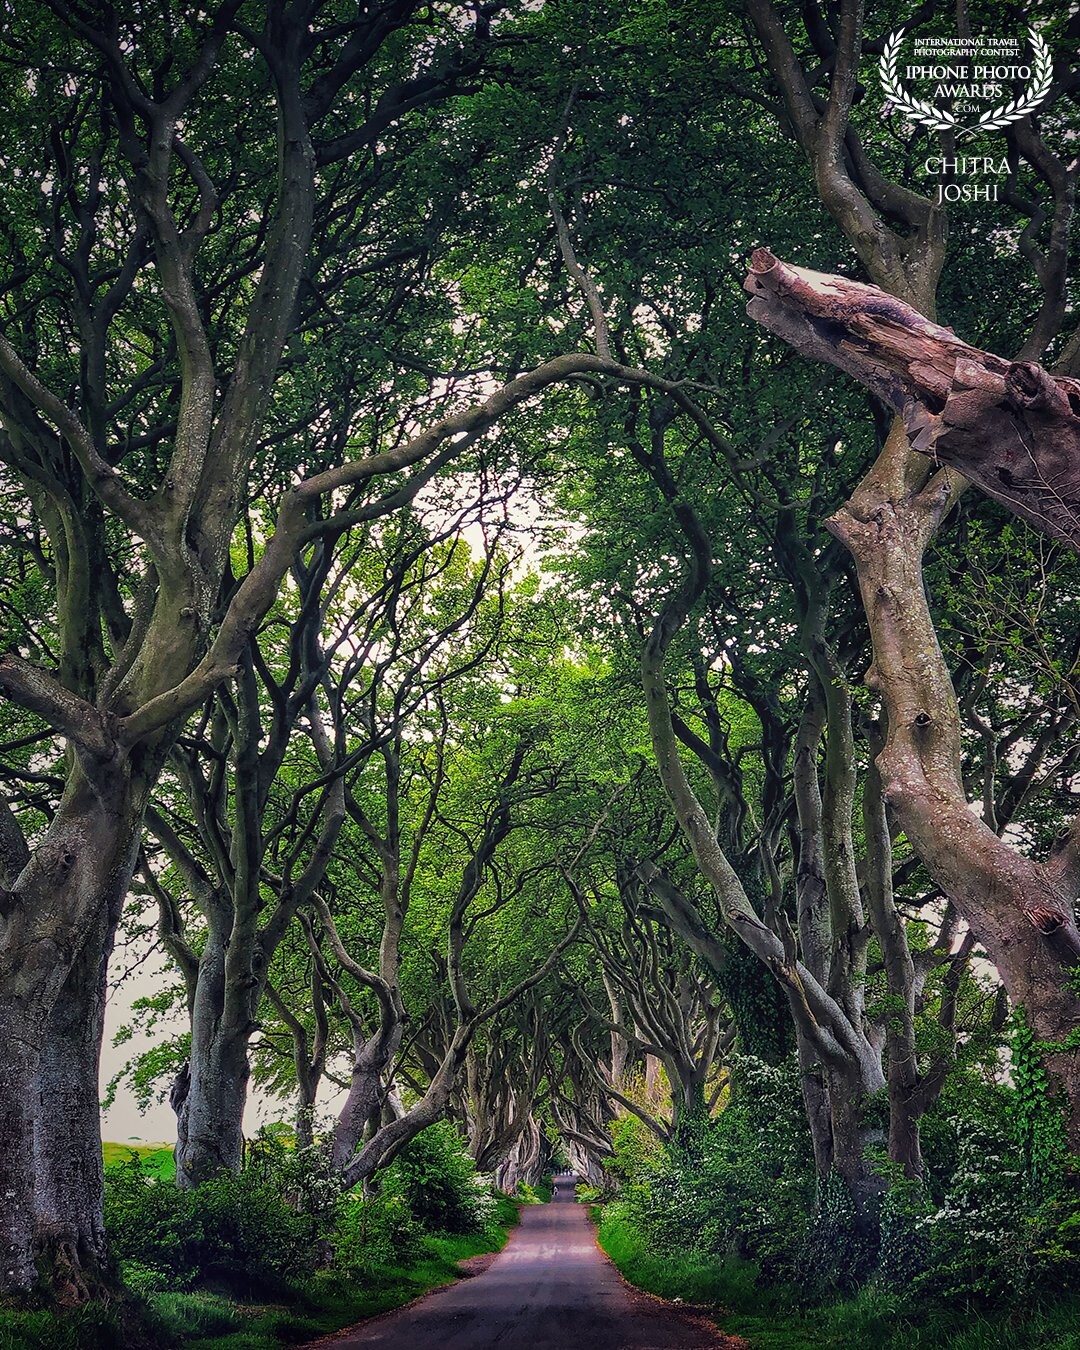 The Dark Hedges, Northern Ireland, UK- A serene location where the series Game of Thrones was shot. You can't not more mesmerized by these beautiful tree branches, all intertwined.